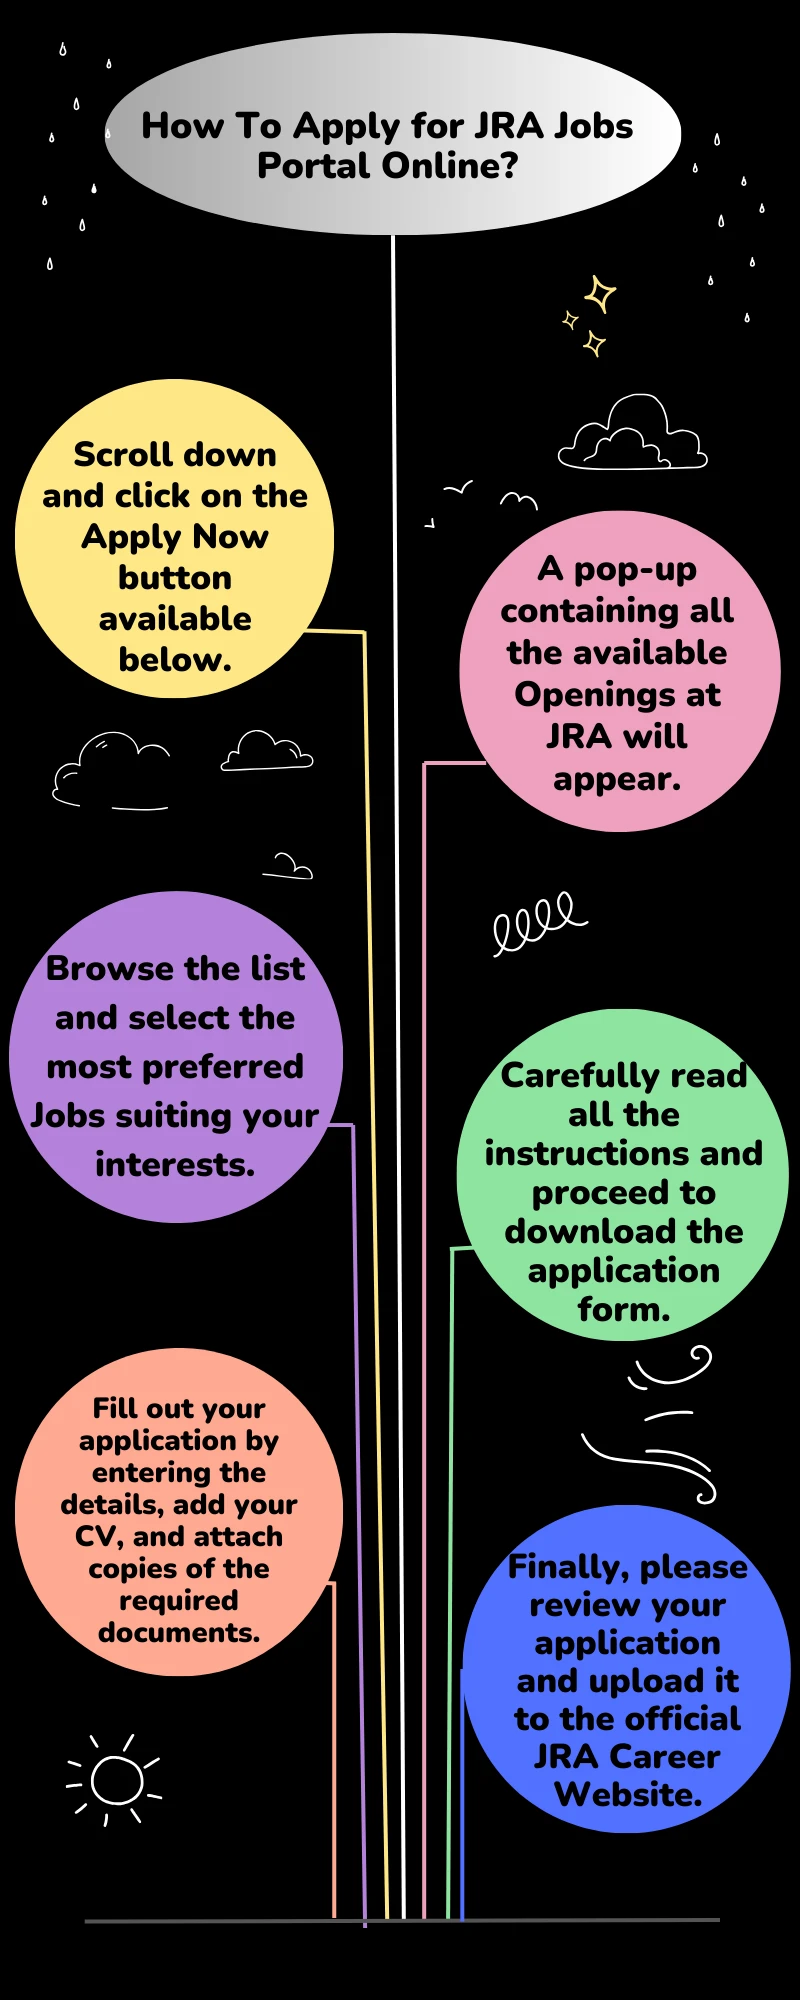 How To Apply for JRA Jobs Portal Online?